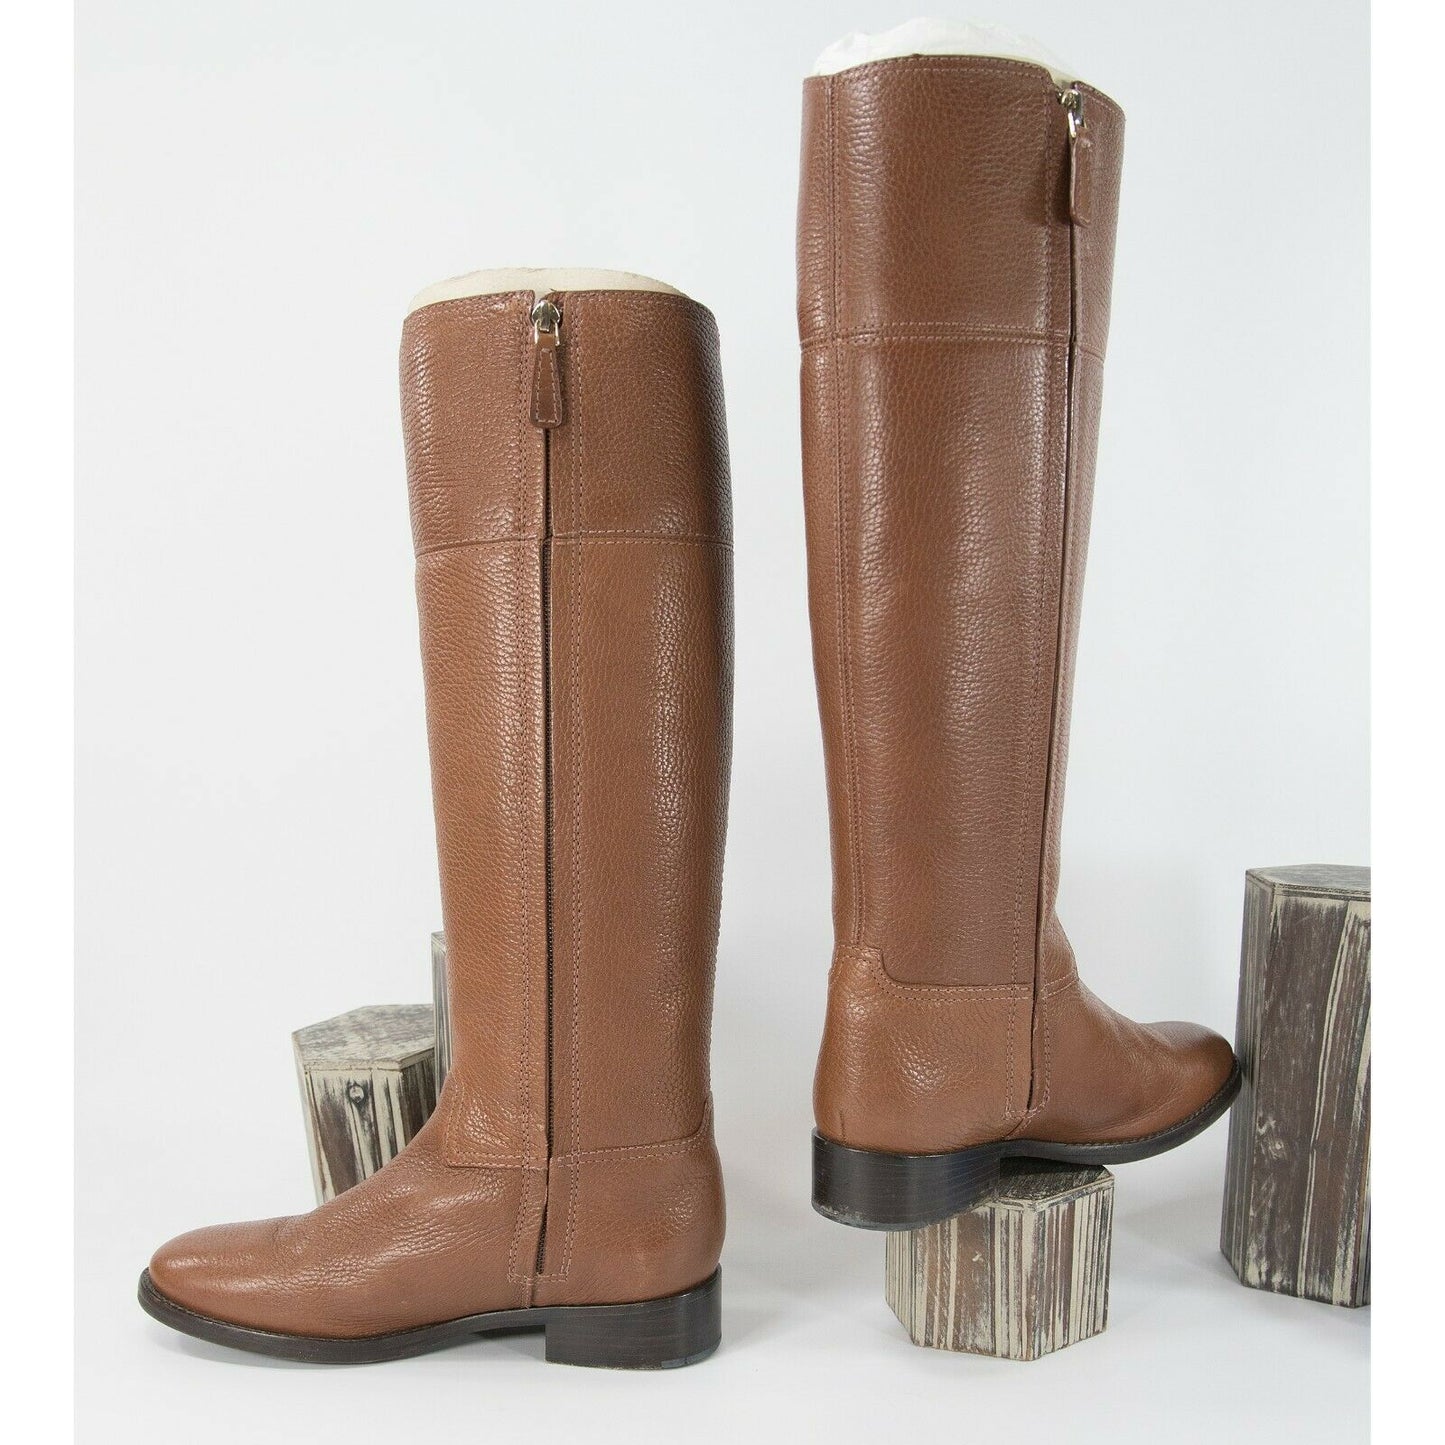 Tory Burch Rustic Brown Jolie Pebbled Leather Tall Riding Boots Sz 6